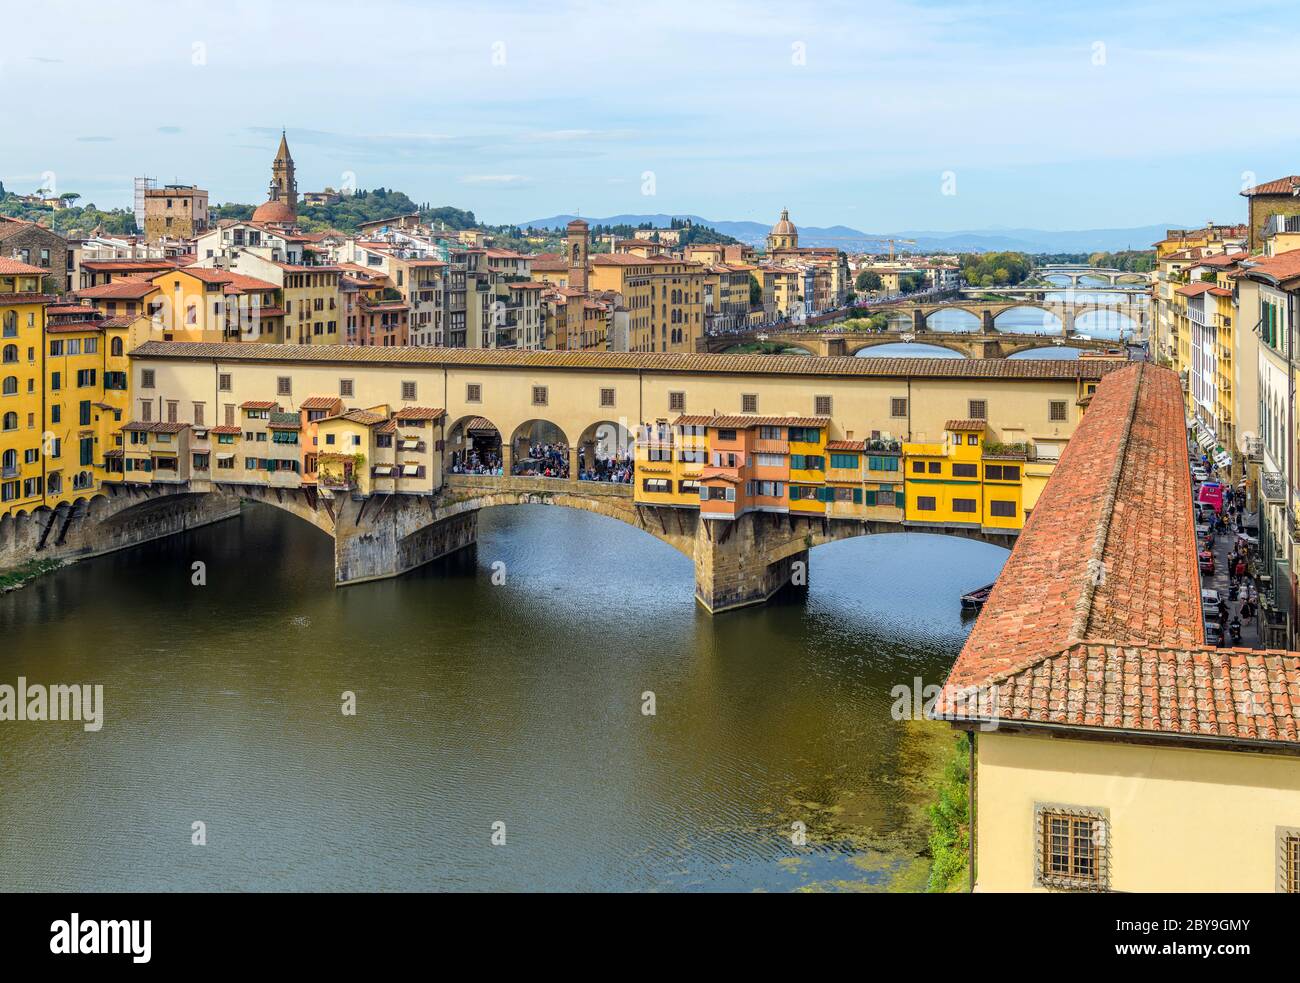 Arno River in Florence - A panoramic overview of Arno River at the Ponte Vecchio "Old Bridge" in the heart of Florence, Tuscany, Italy. Stock Photo